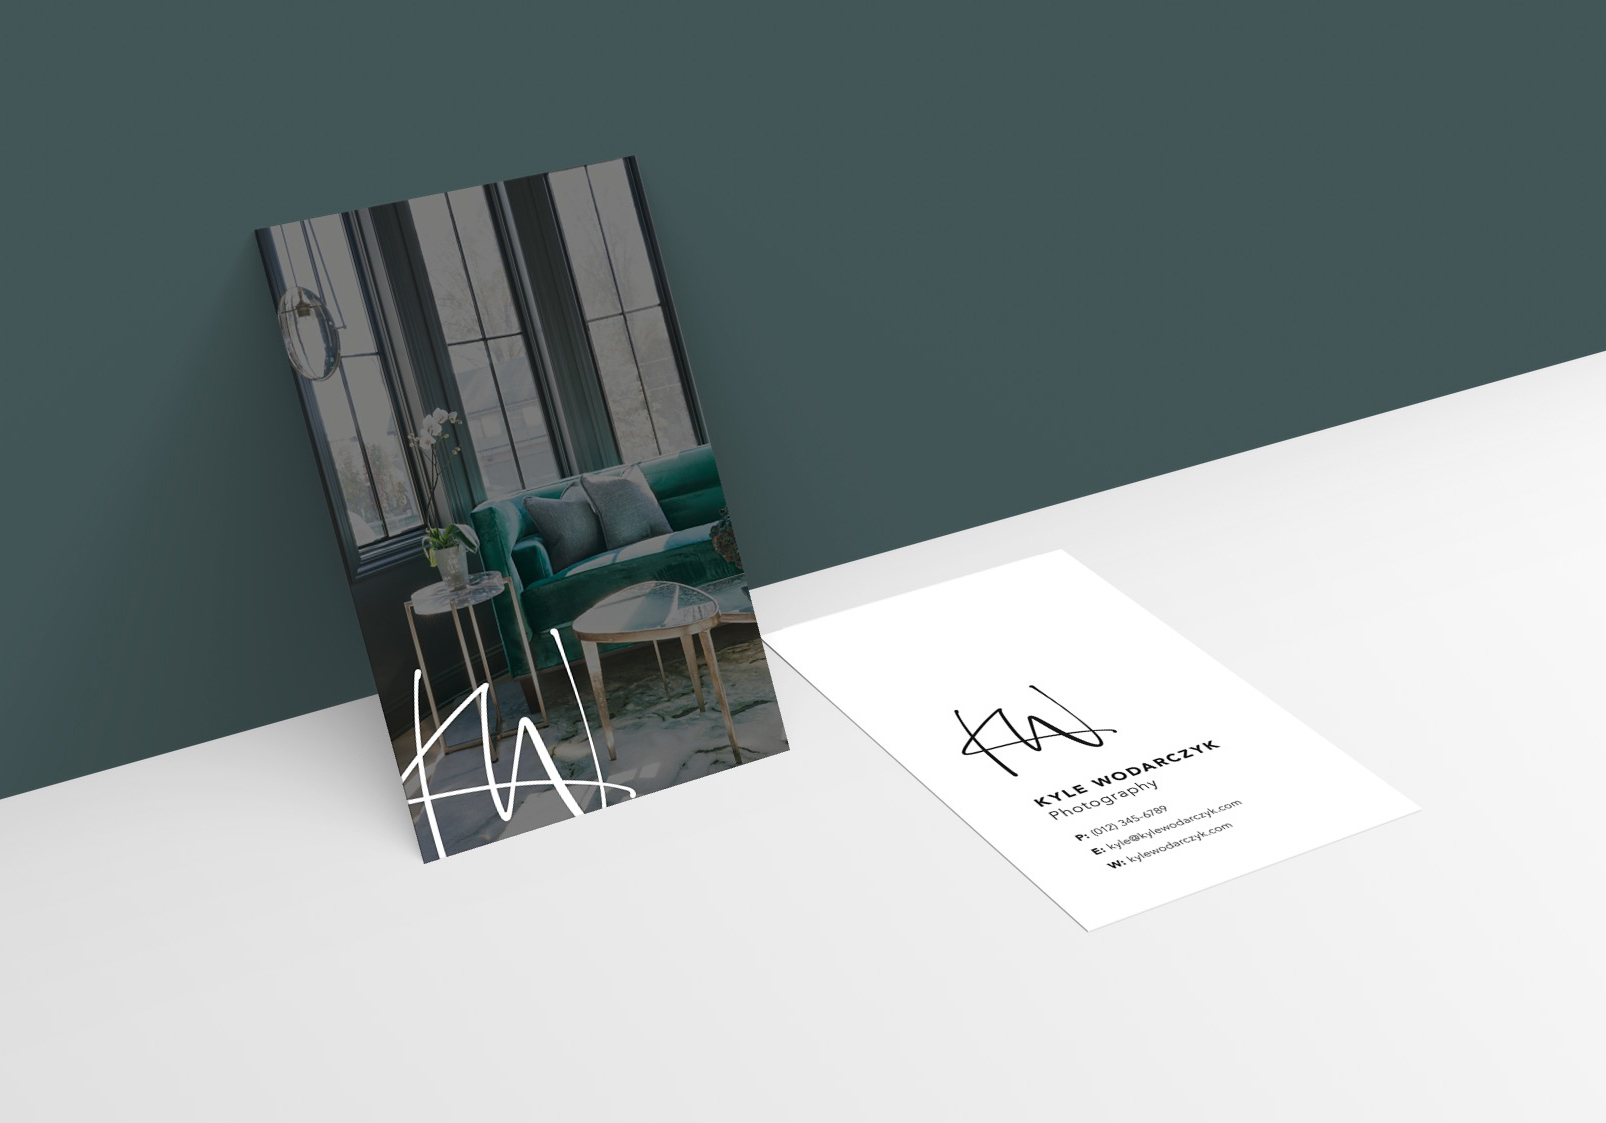 Business cards for Kyle Wodarczyk